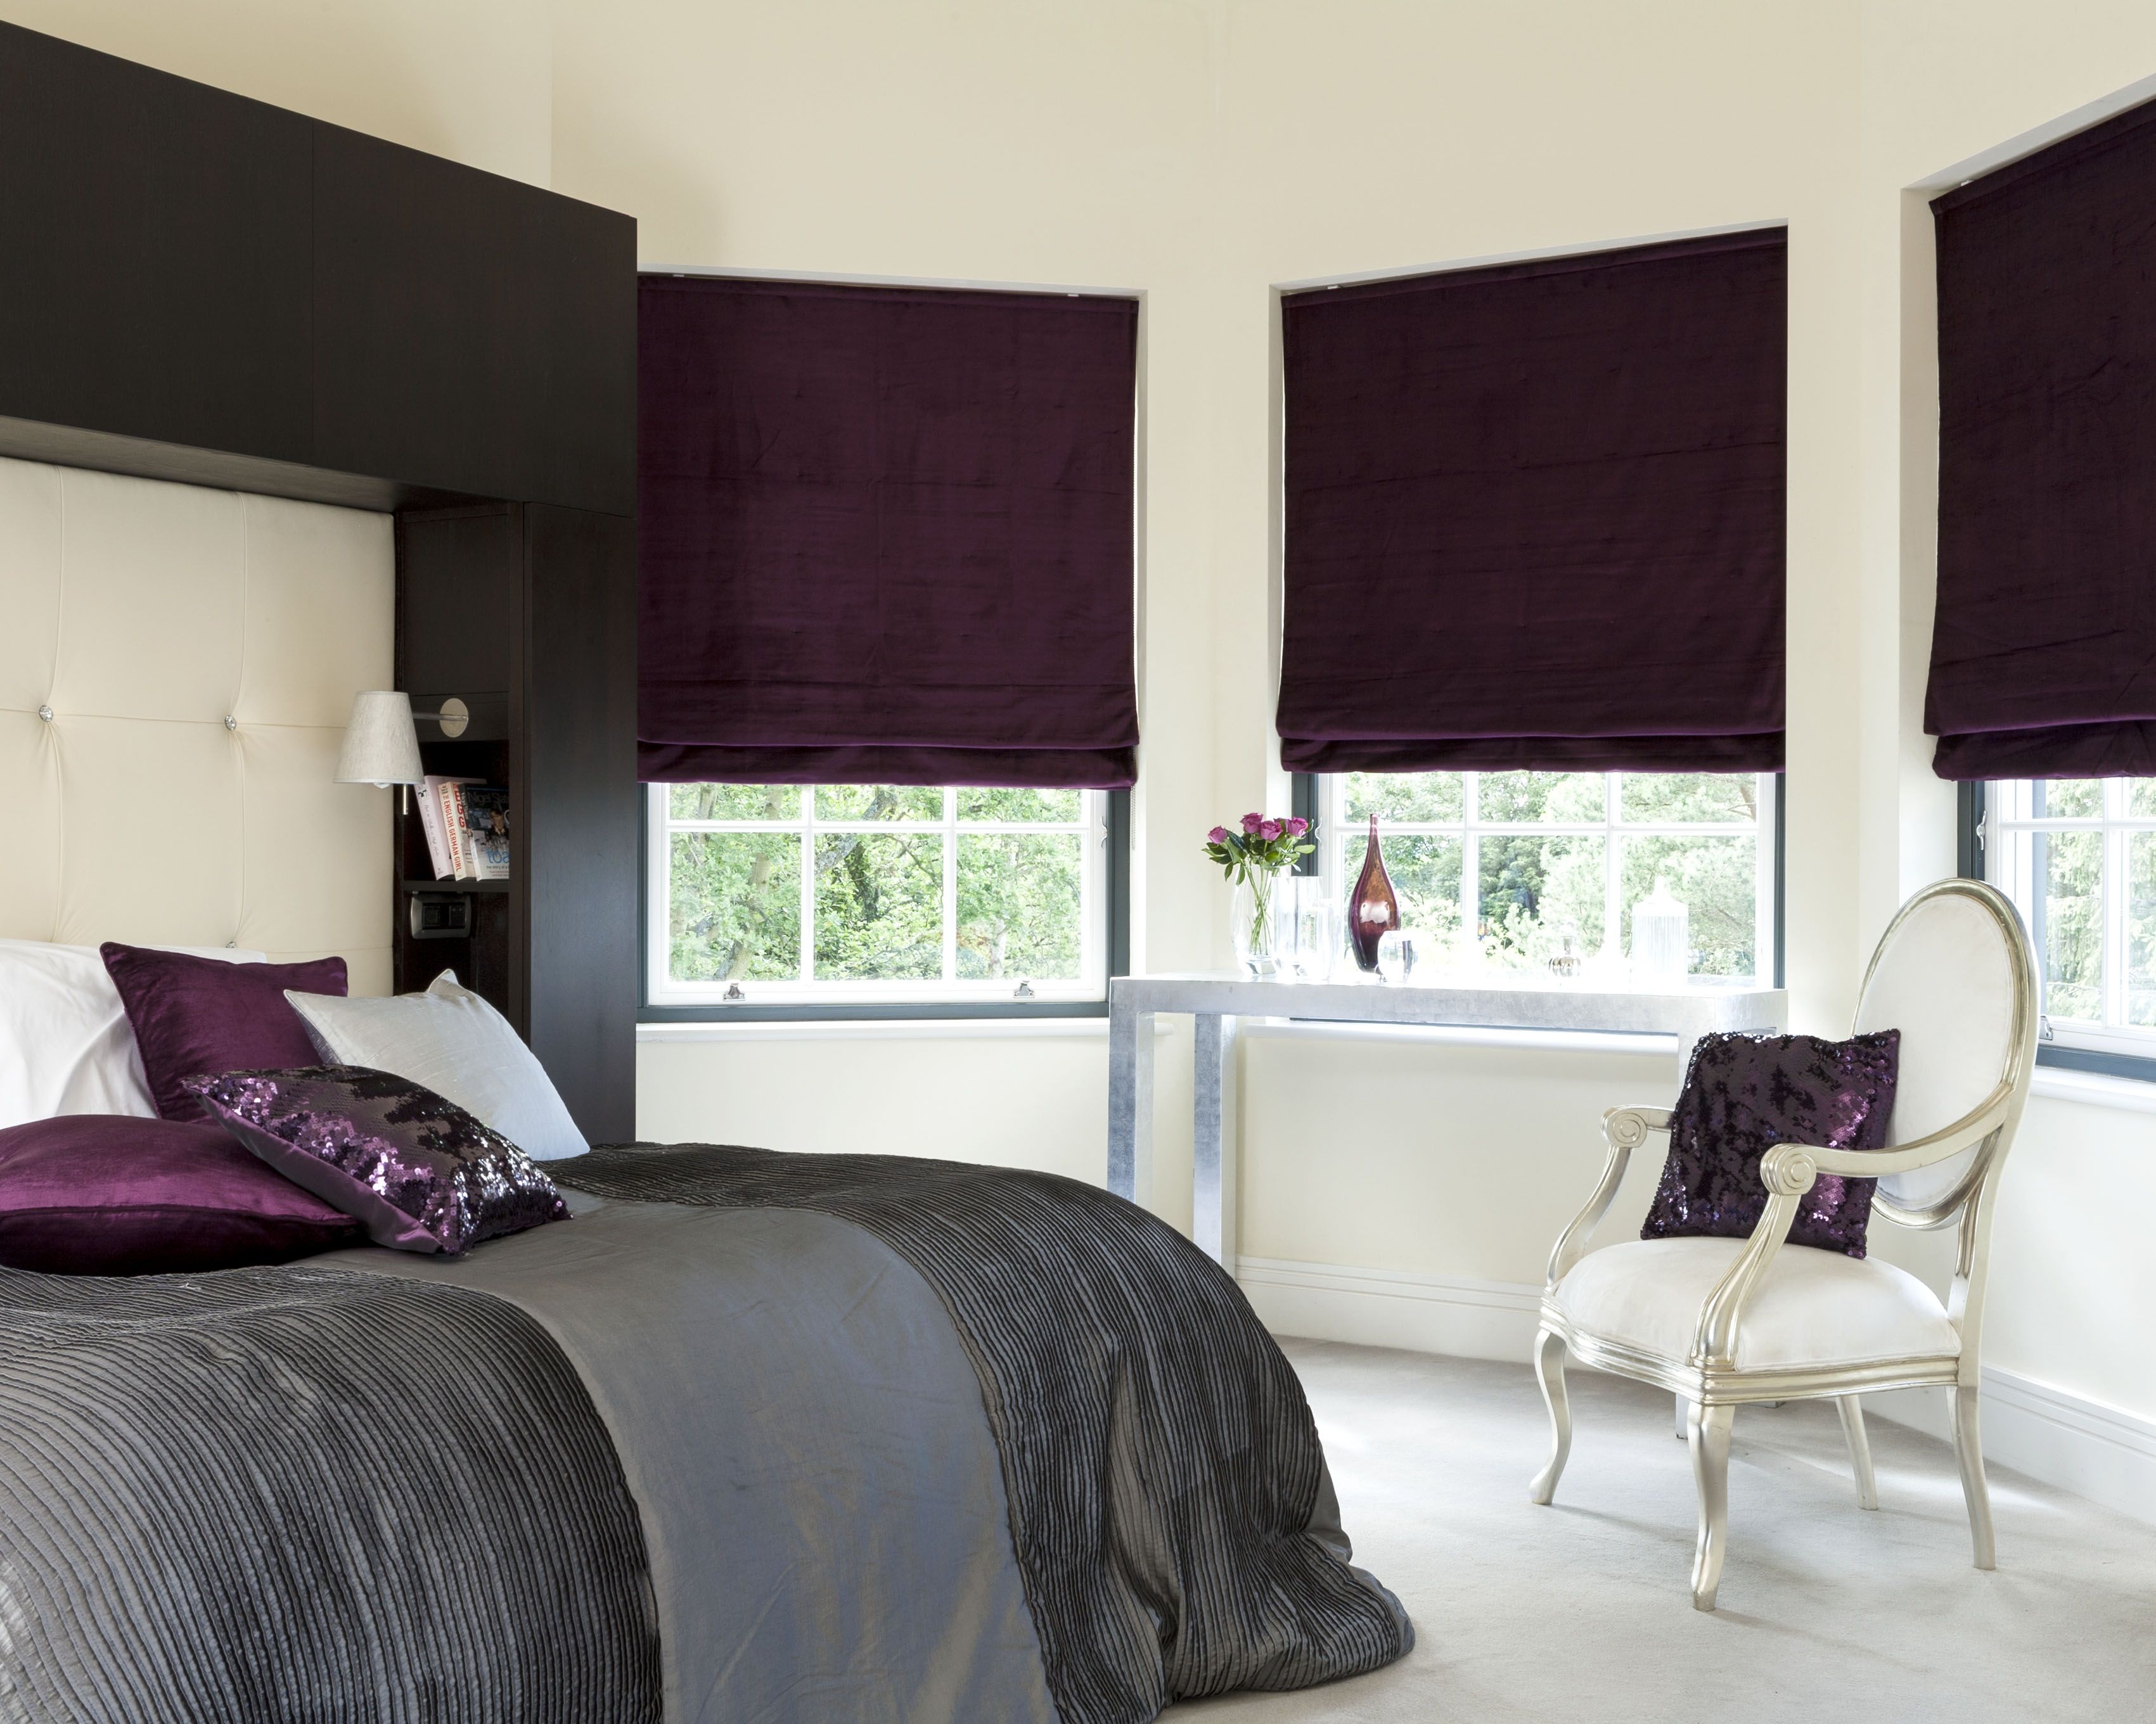 Cheapest Blinds Uk Ltd Black Roman Blinds With Regard To Black Roman Blinds (View 4 of 15)